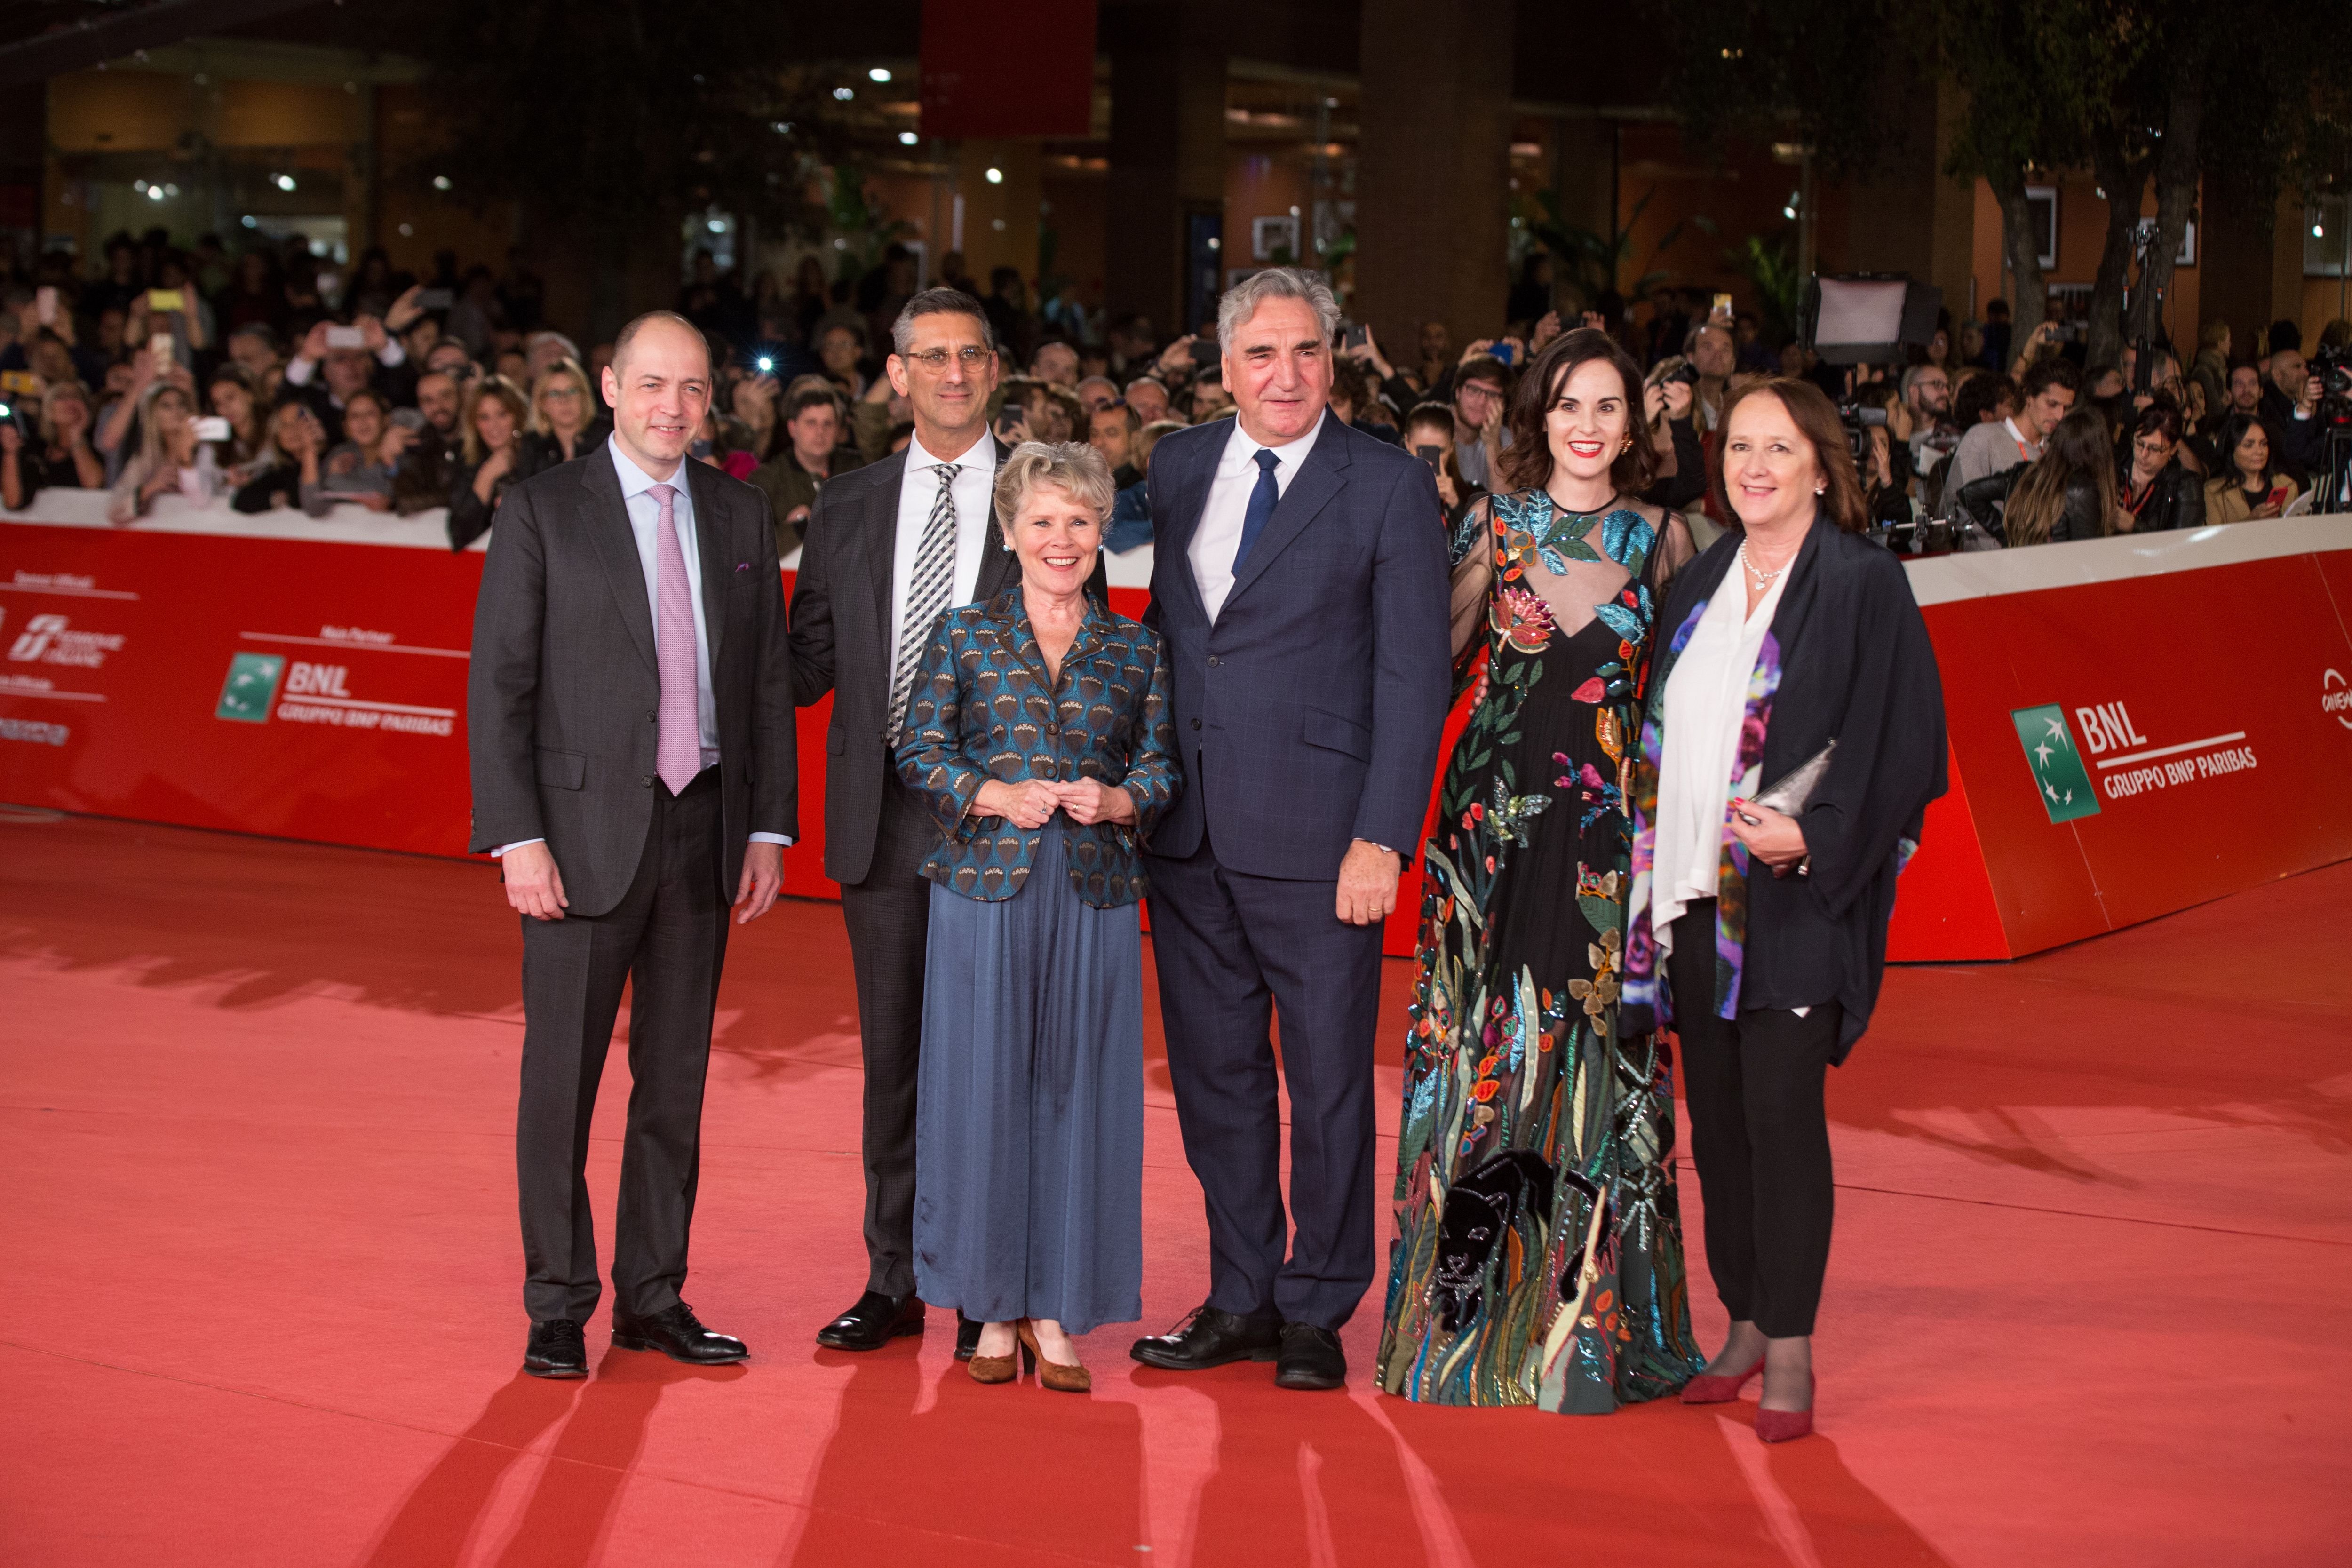 The Cast of "Downton Abbey" at the red carpet at the Rome Film Fest on  October 19, 2019 | Source: Getty Images